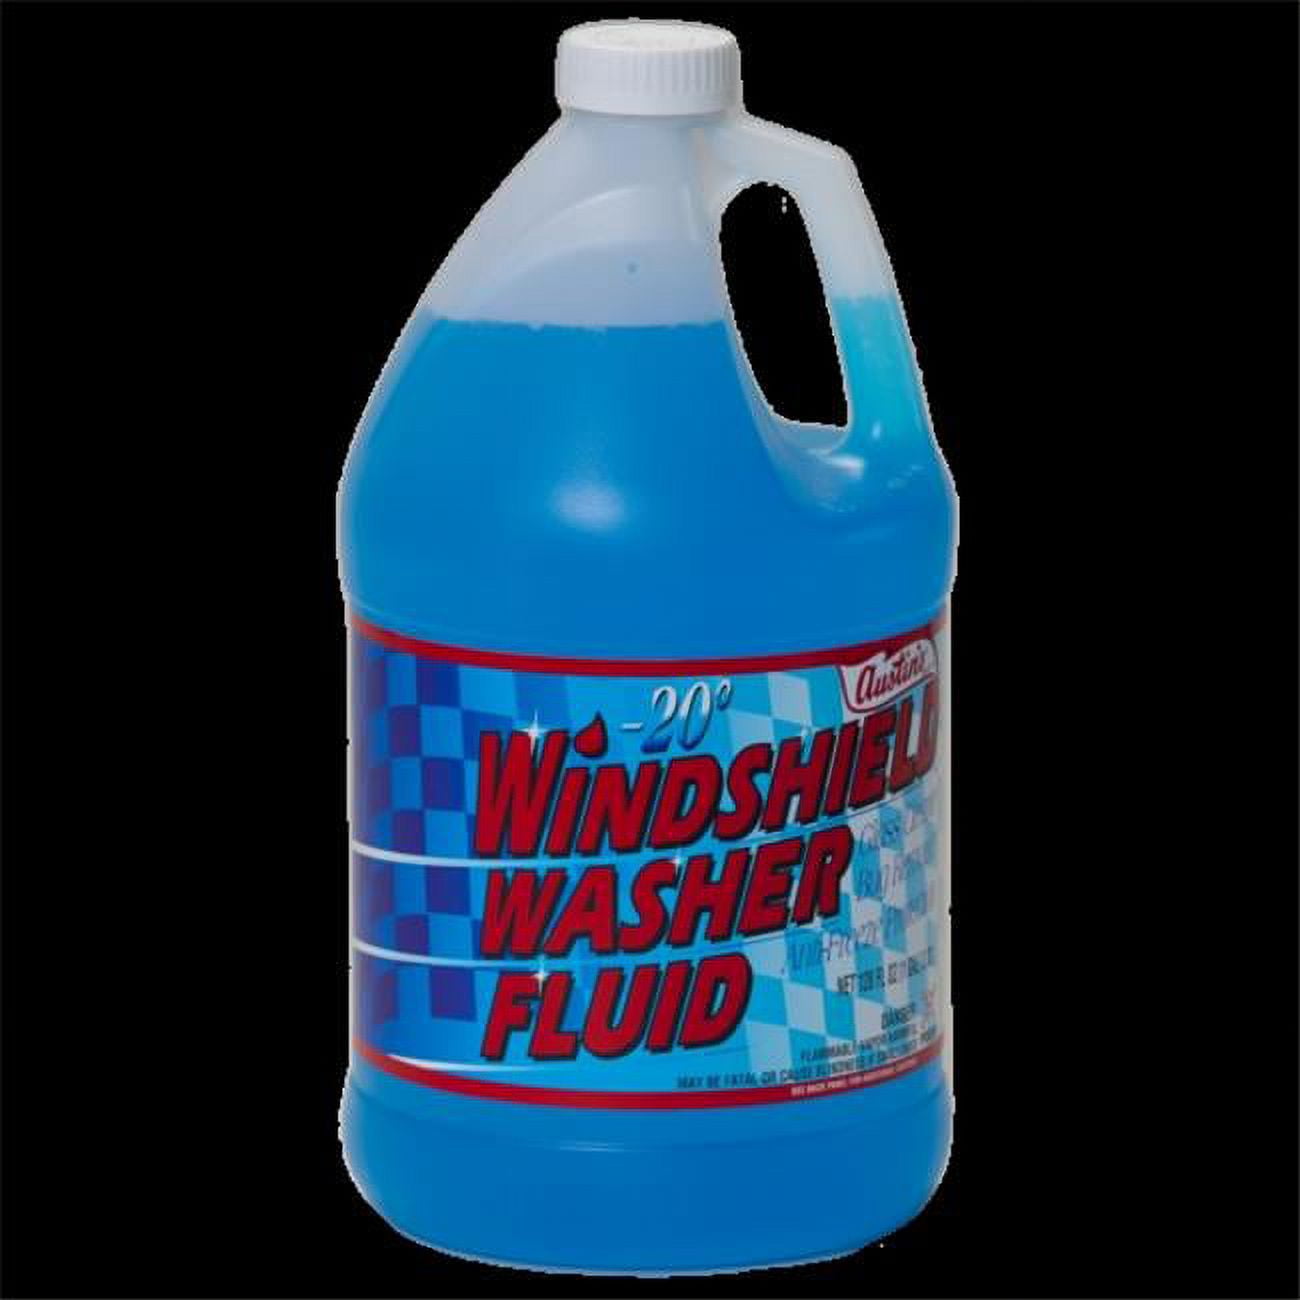 Windshield Washer Fluid — T&L Specialty Company, Inc.